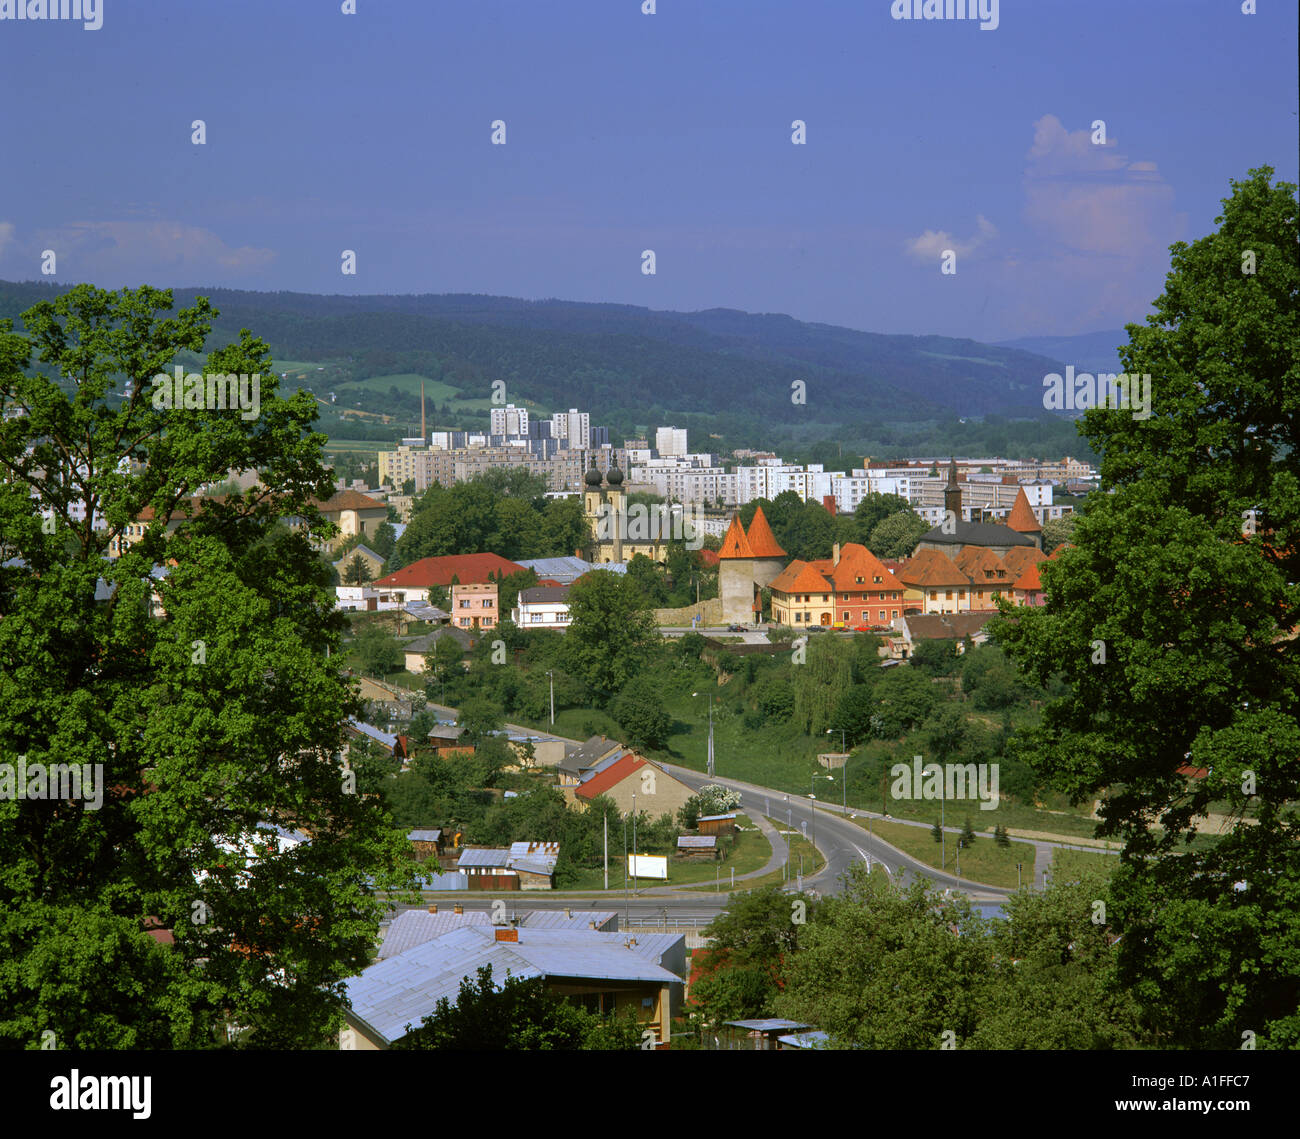 Contrast of old and new buildings in the town of Bardejov Slovakia G Hellier Stock Photo